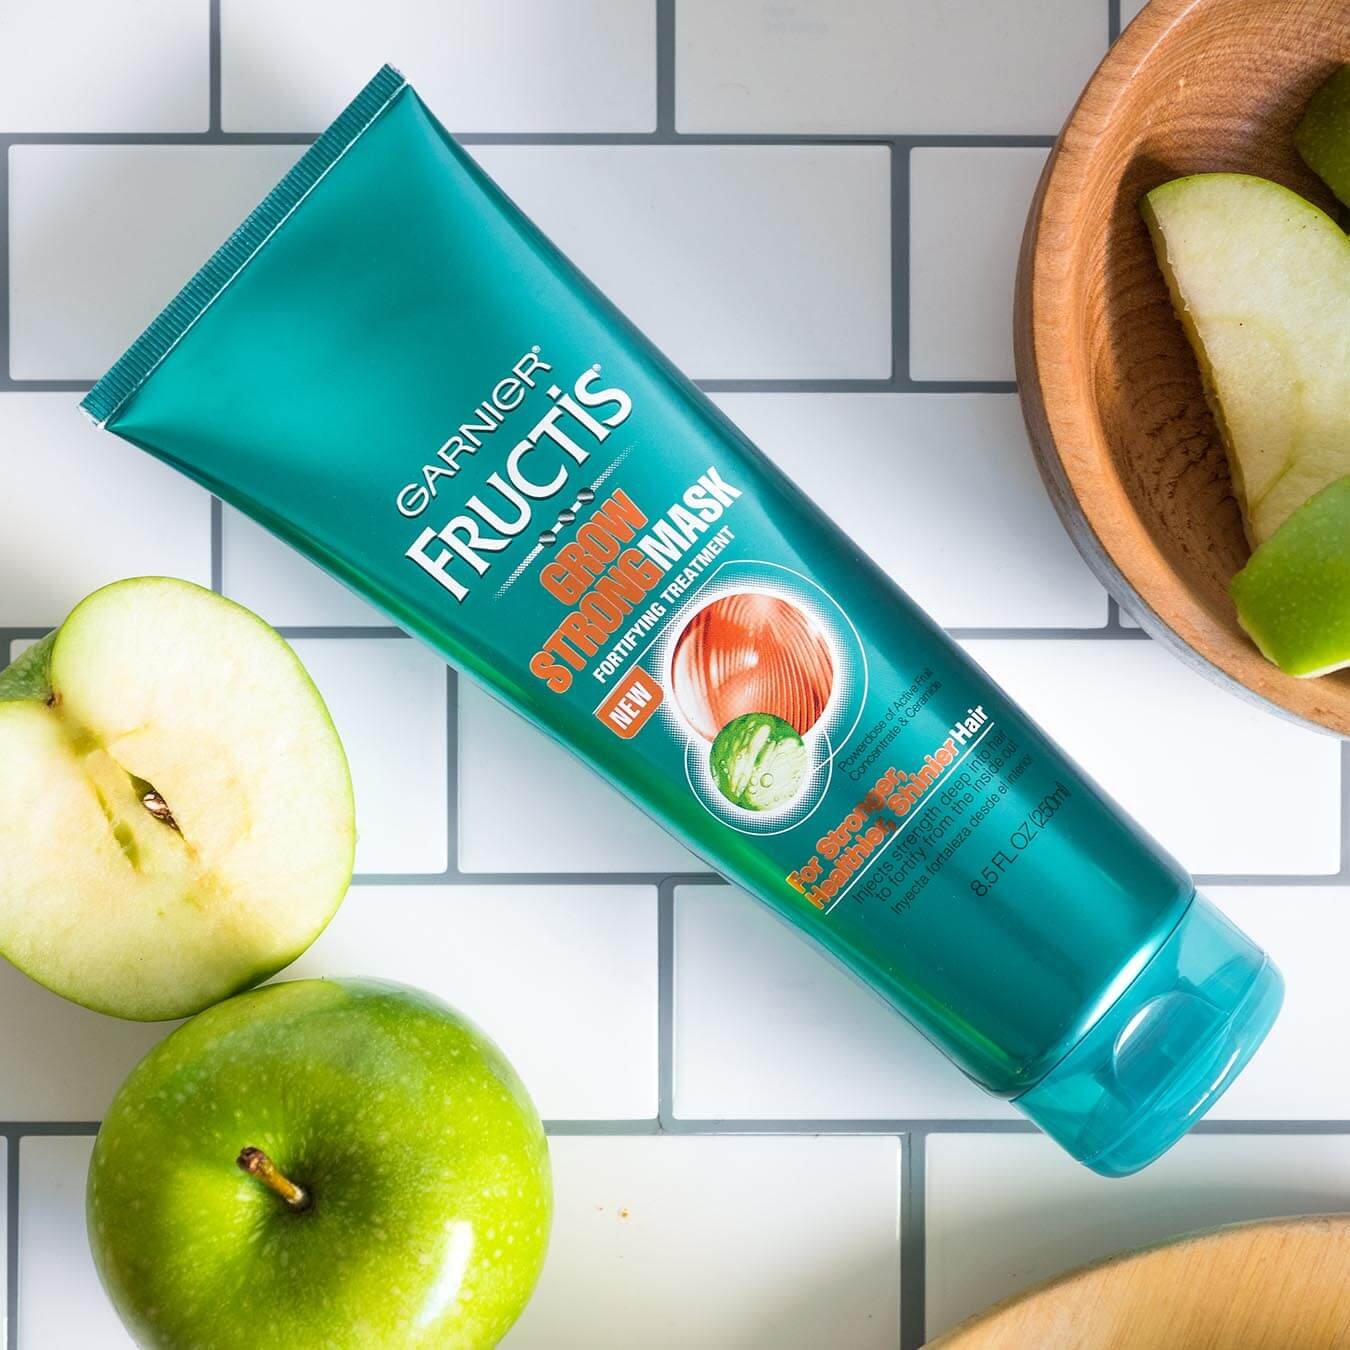 Garnier Fructis Grow Strong mask on a white tiled background with sliced granny smith apples on wooden plates and in wooden bowls.